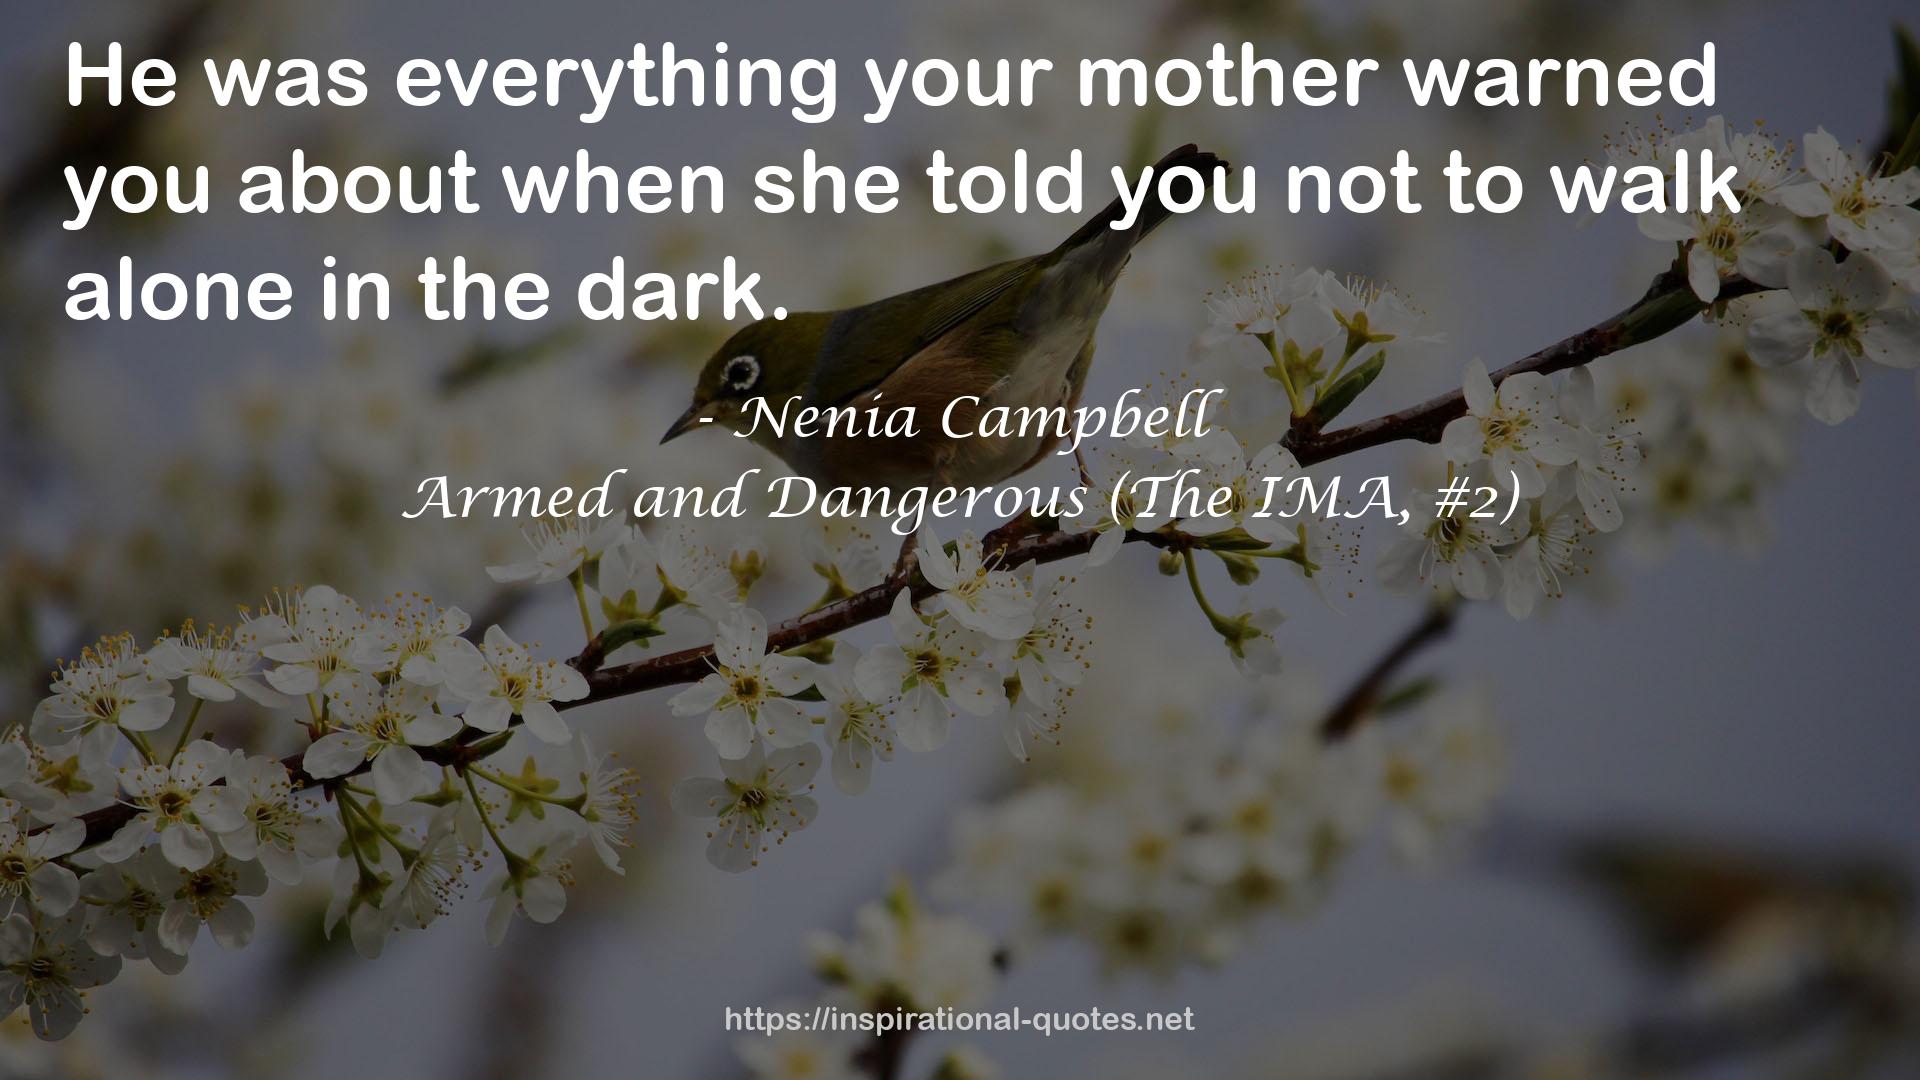 Armed and Dangerous (The IMA, #2) QUOTES